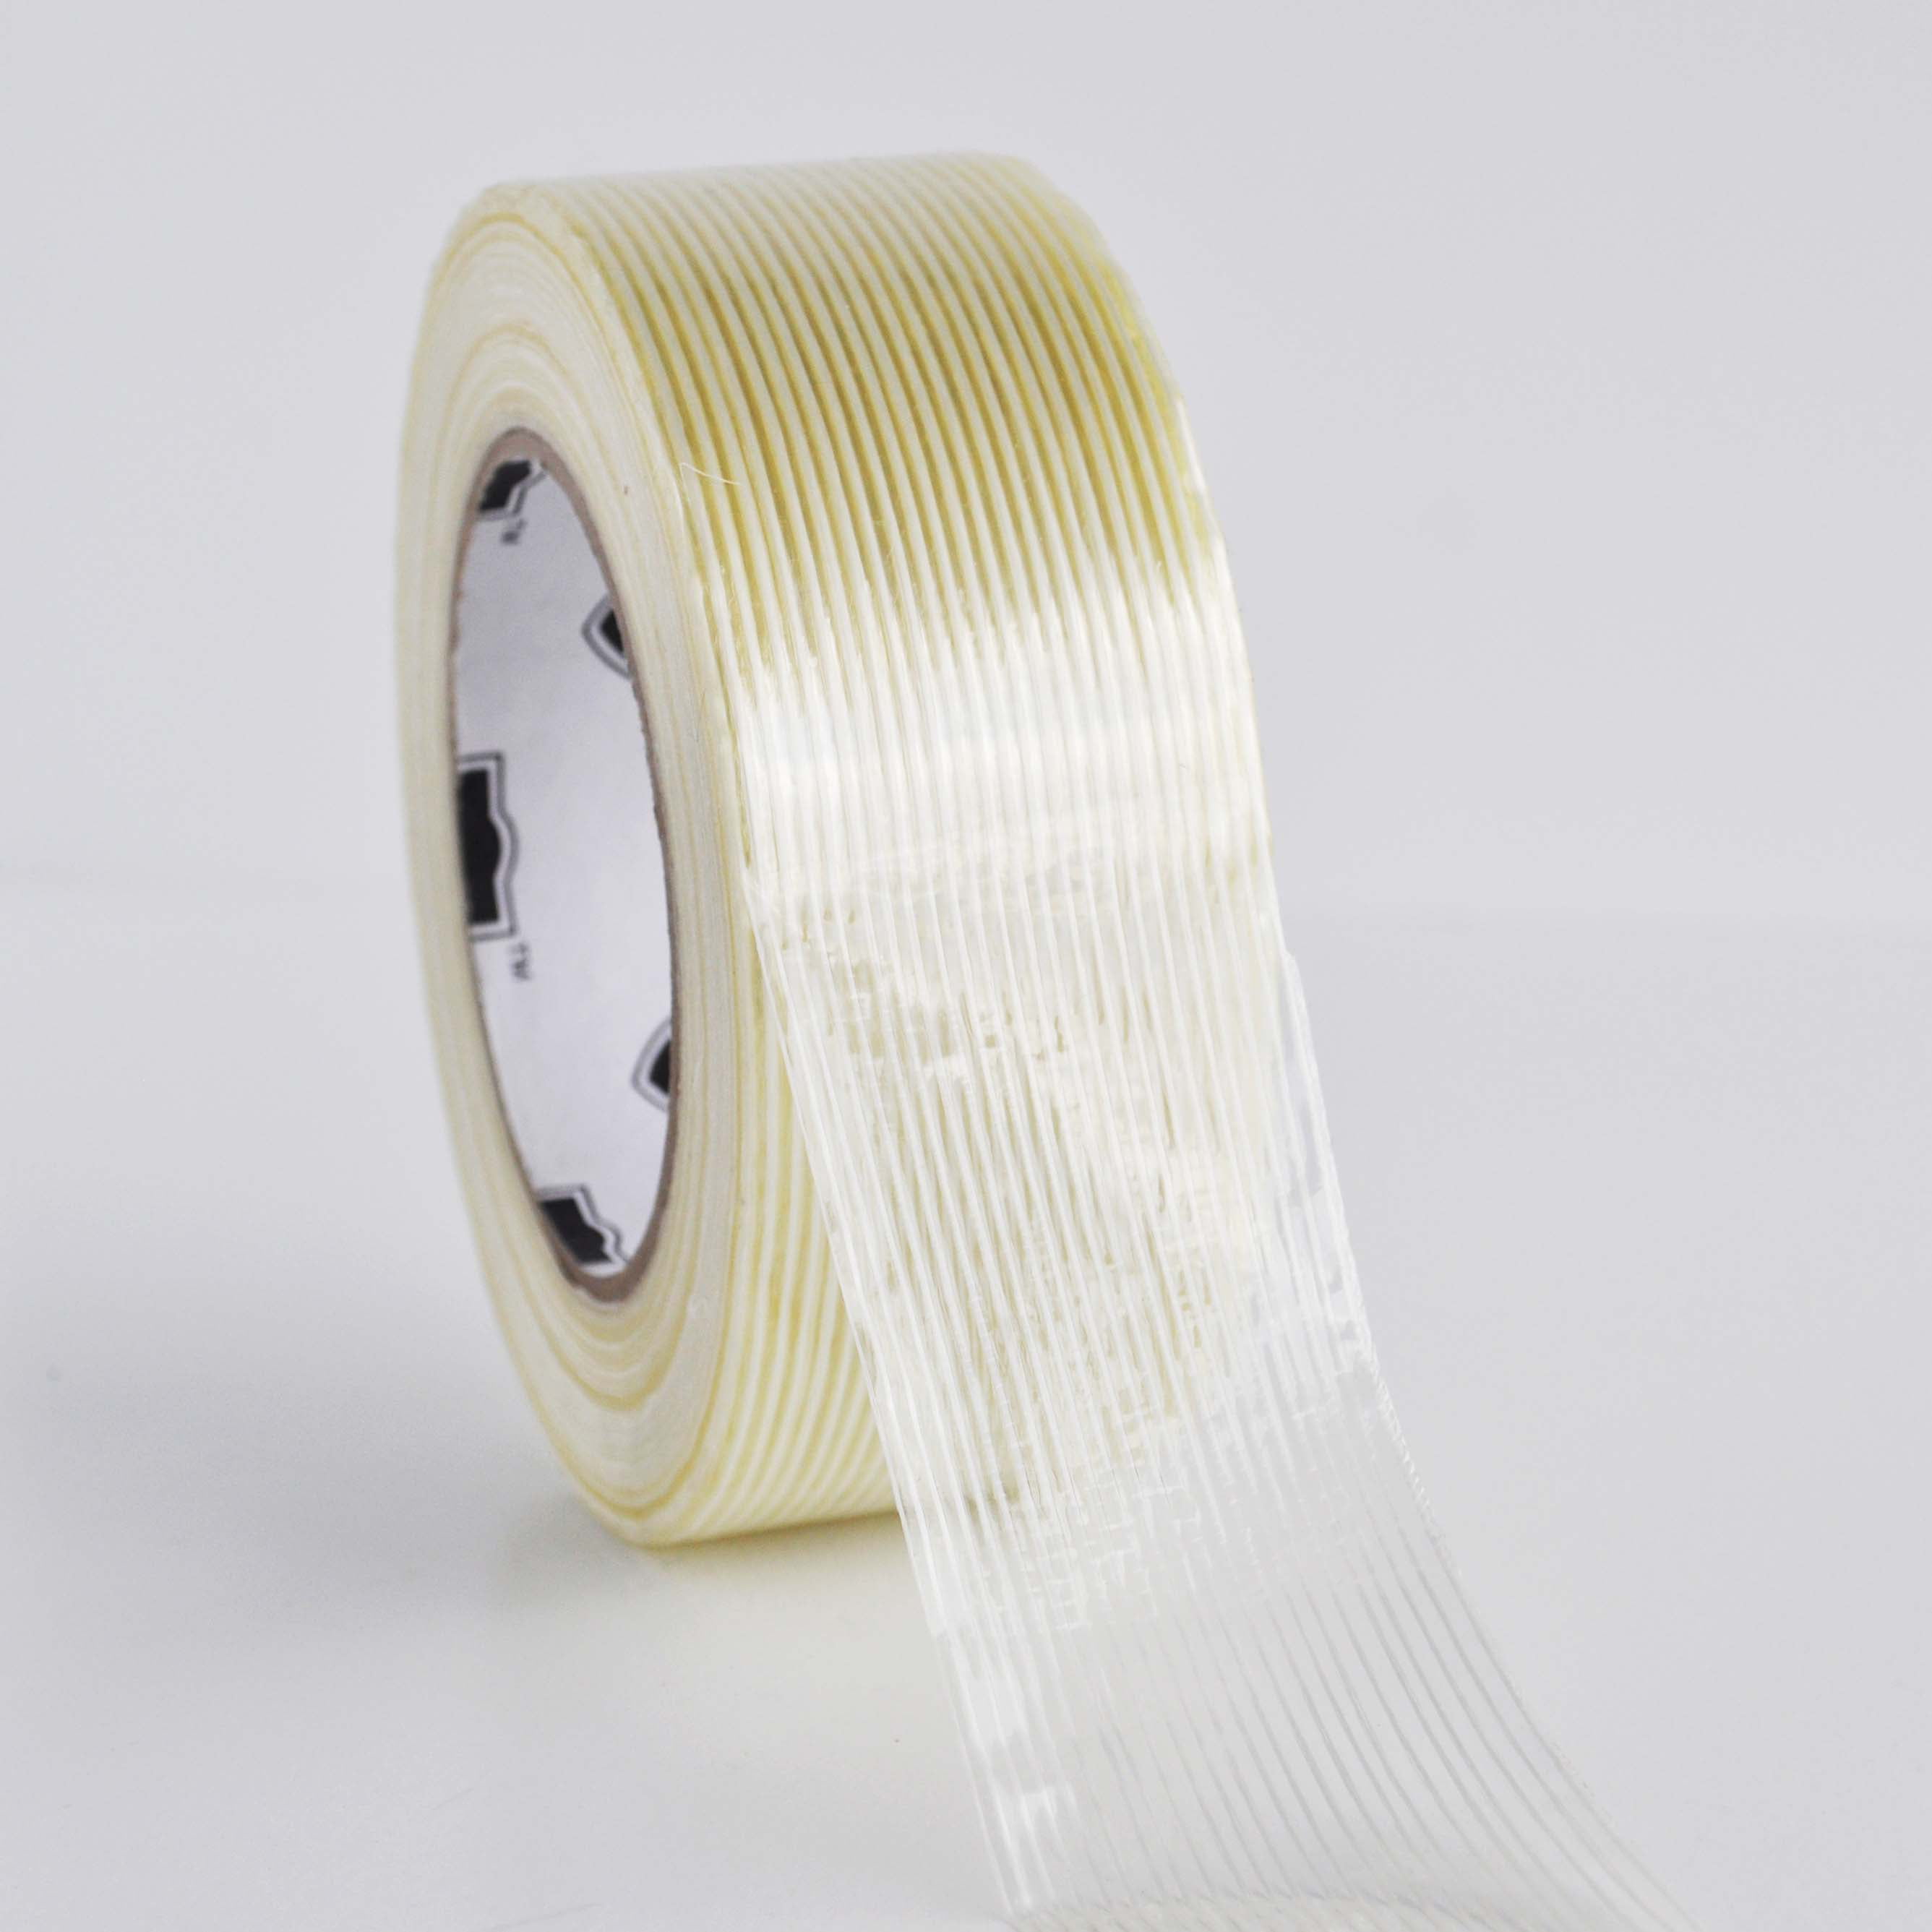 48 Rolls 2" x 60 YDS Fiberglass Reinforced Filament Strapping Packing Tape Clear 